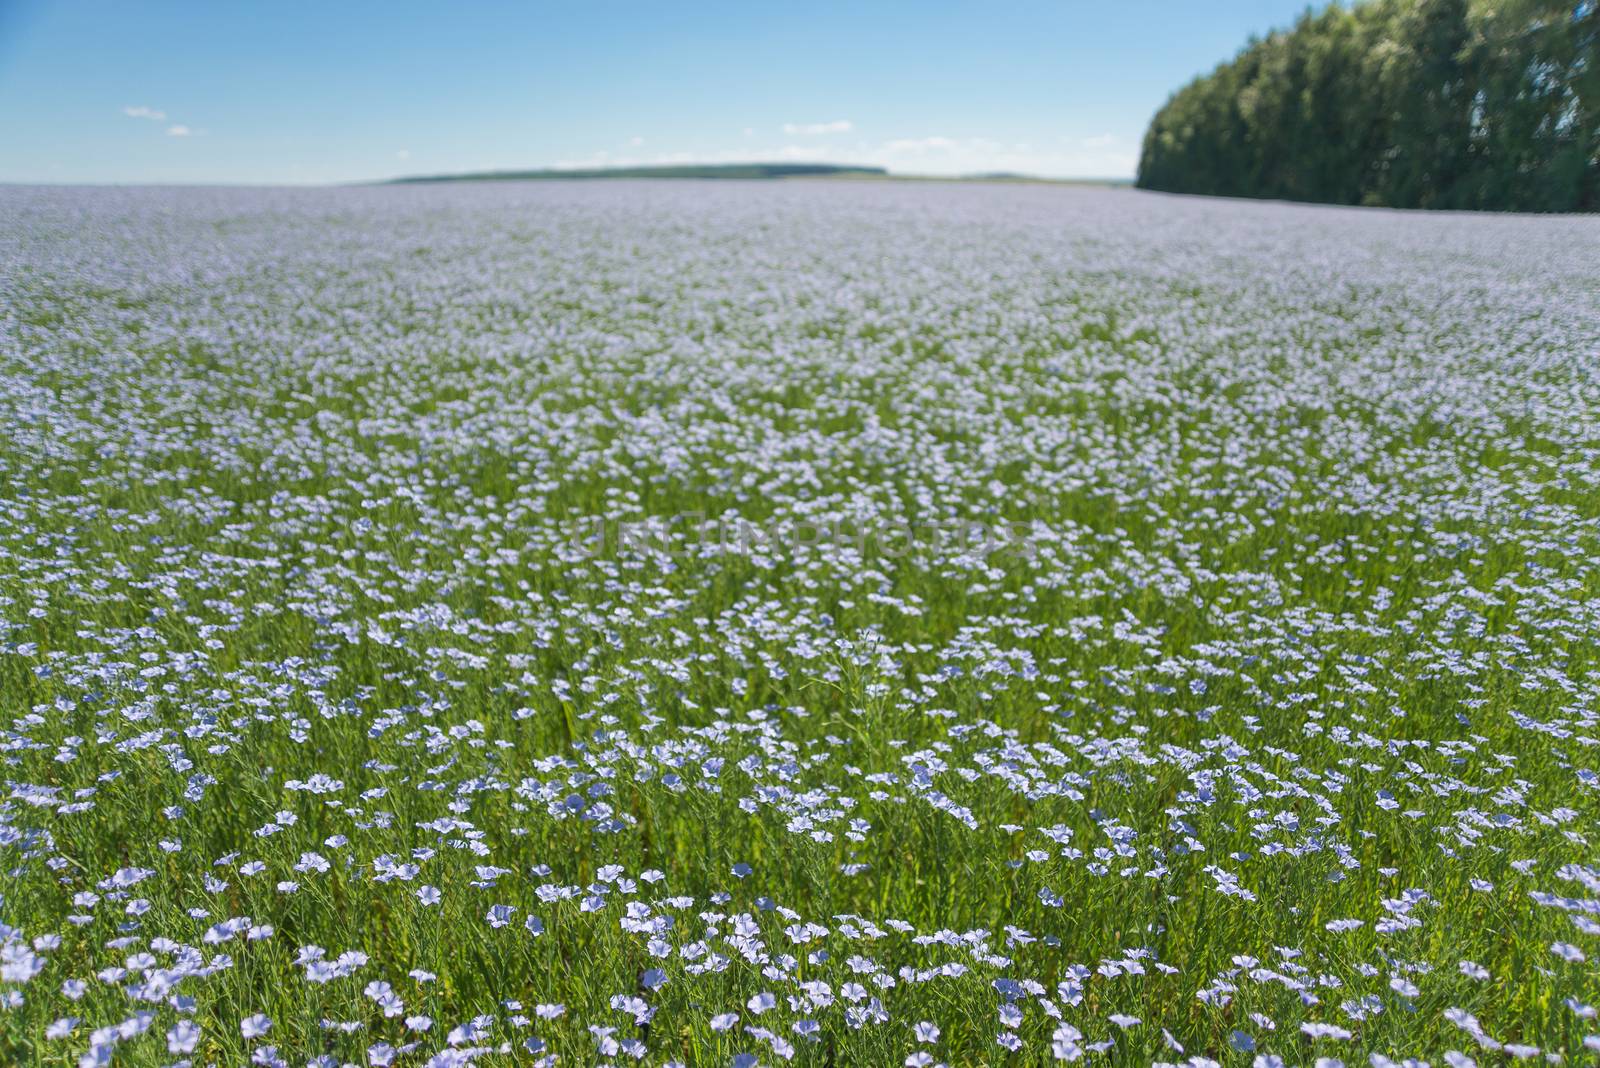 Vast blue field of blooming flax under the blue sky. Focus on the foreground